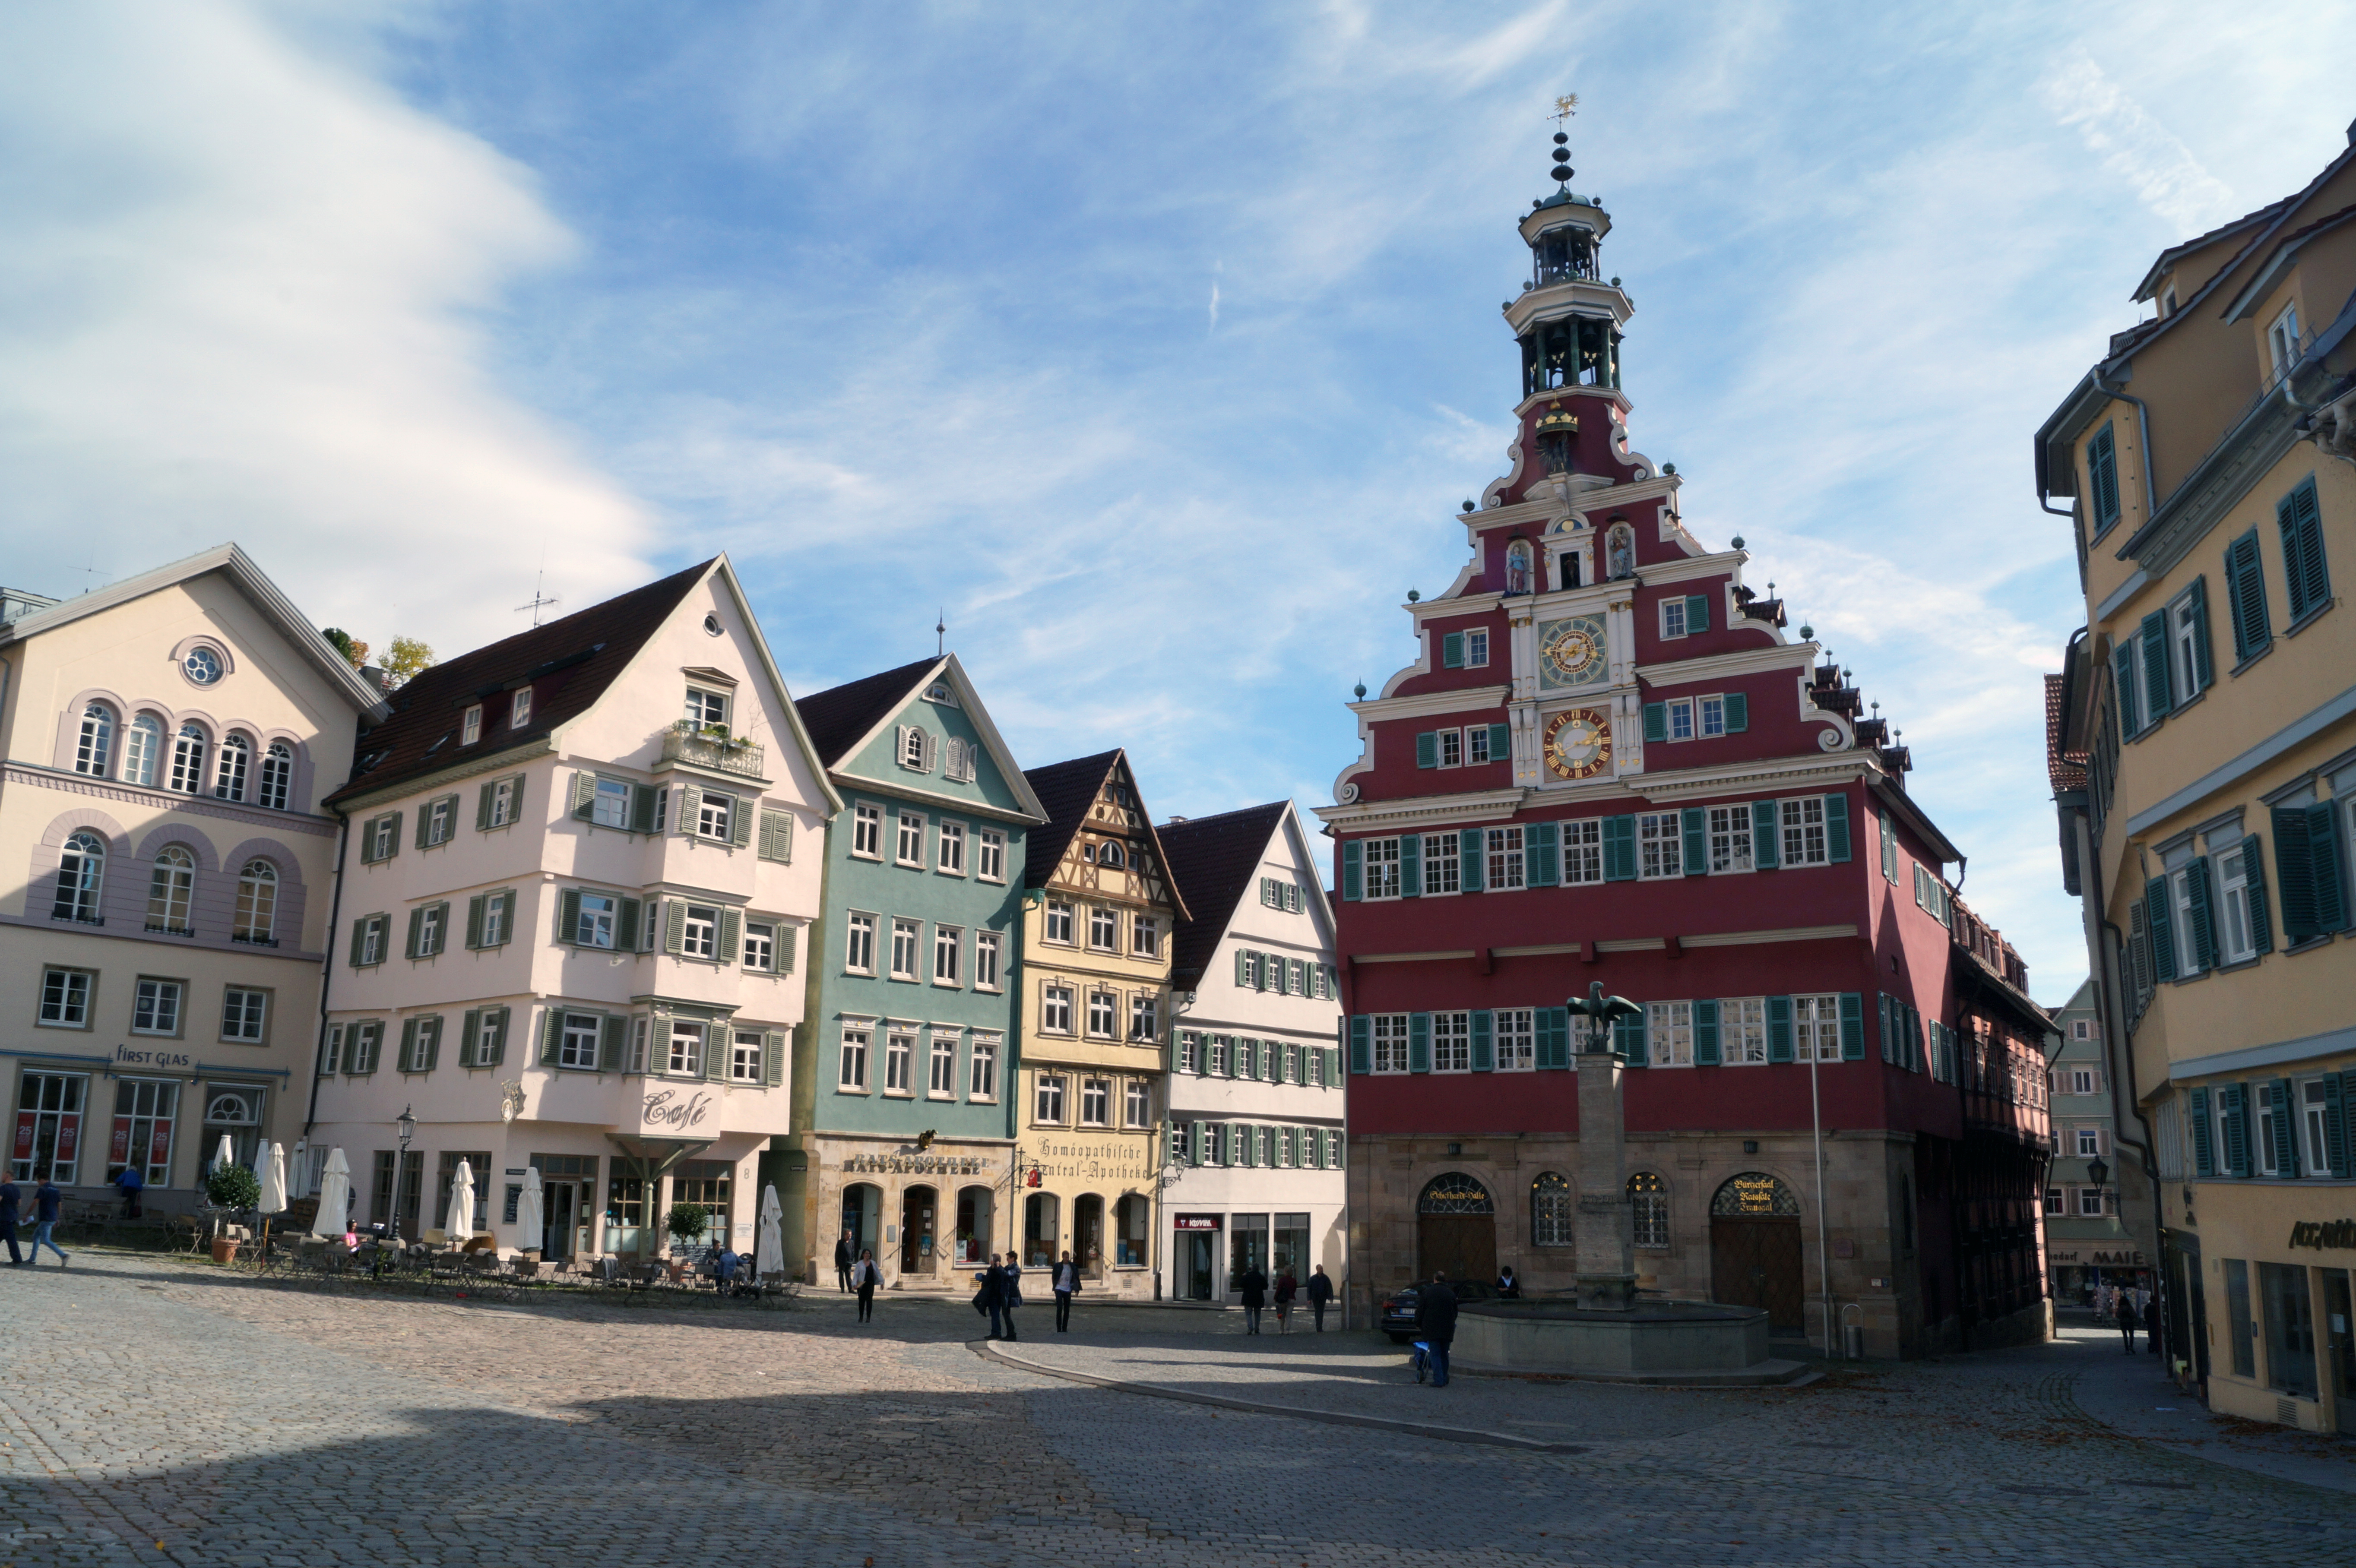 Historic downtown with the old town hall on the right. Morgenstadt Smart City